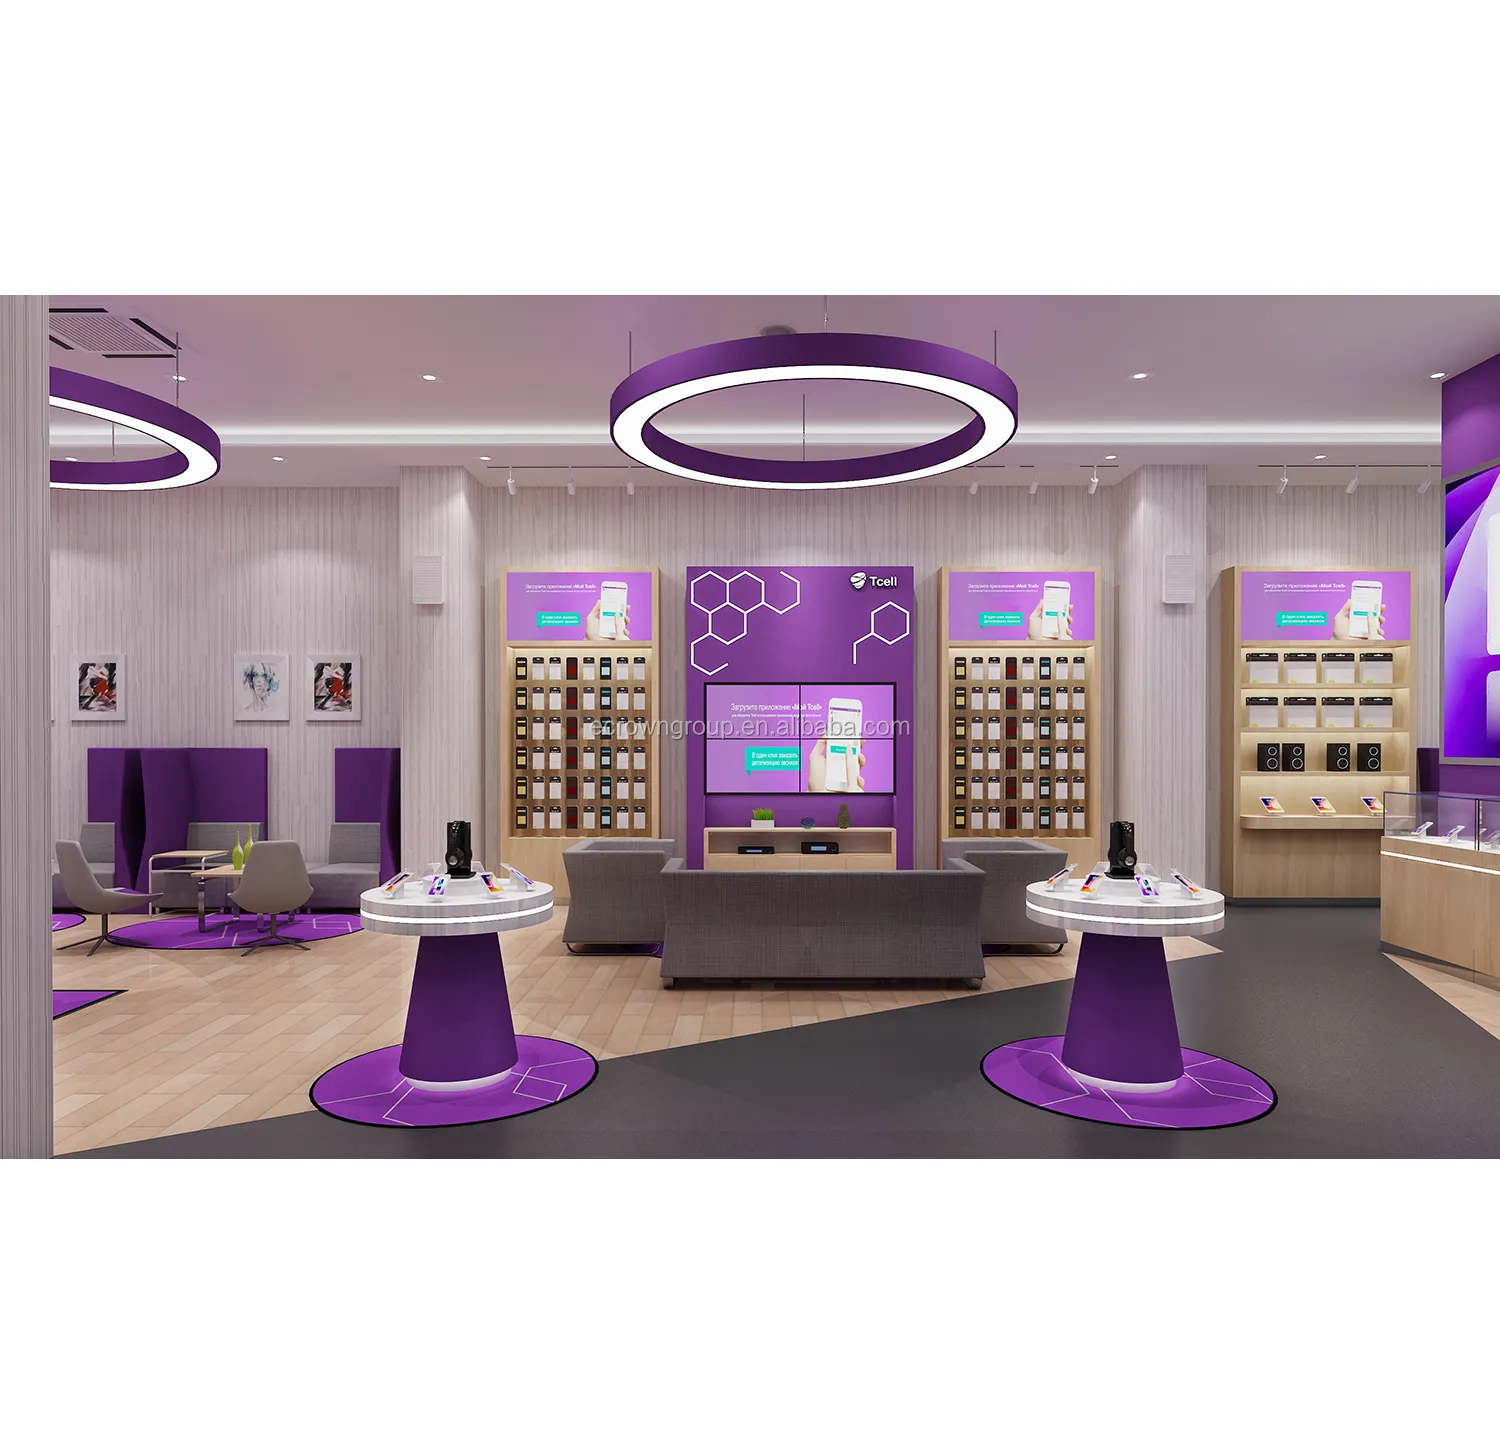 Rechi Provide Retail Electronic Store Interior Design & Retail Fitout Service To Enhance Your Brand Image & Customer Experience